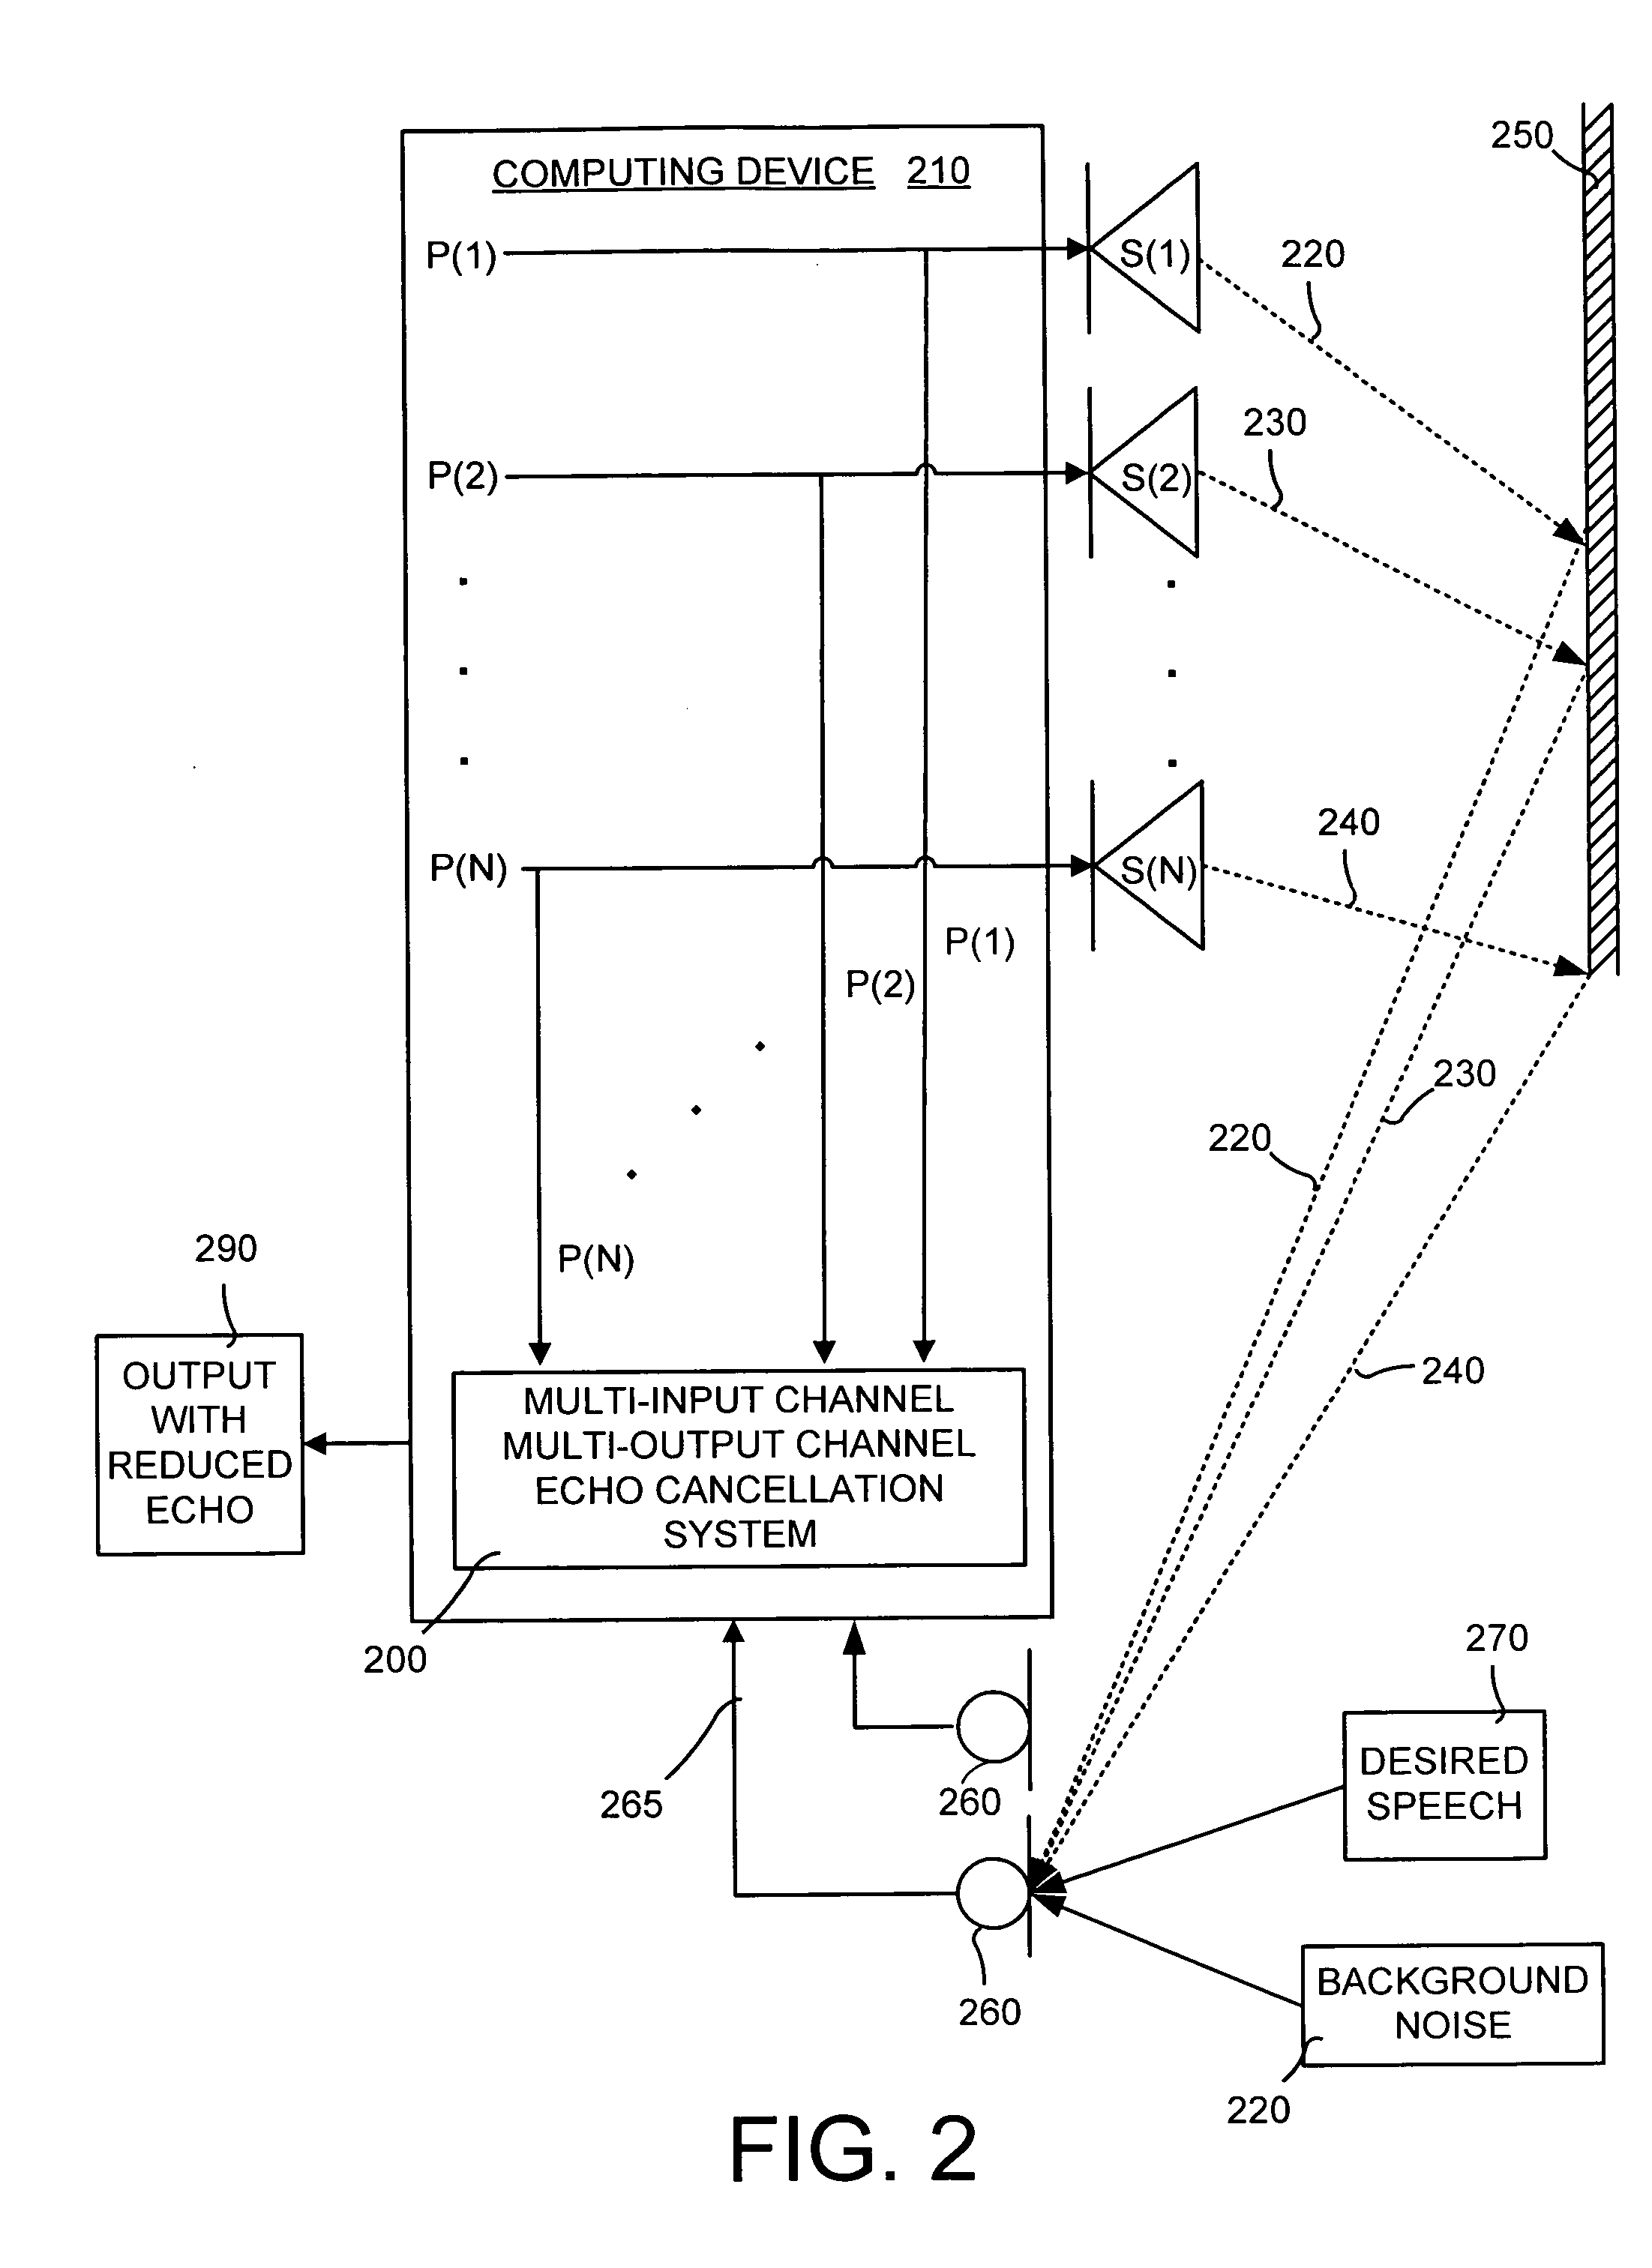 Multi-input channel and multi-output channel echo cancellation